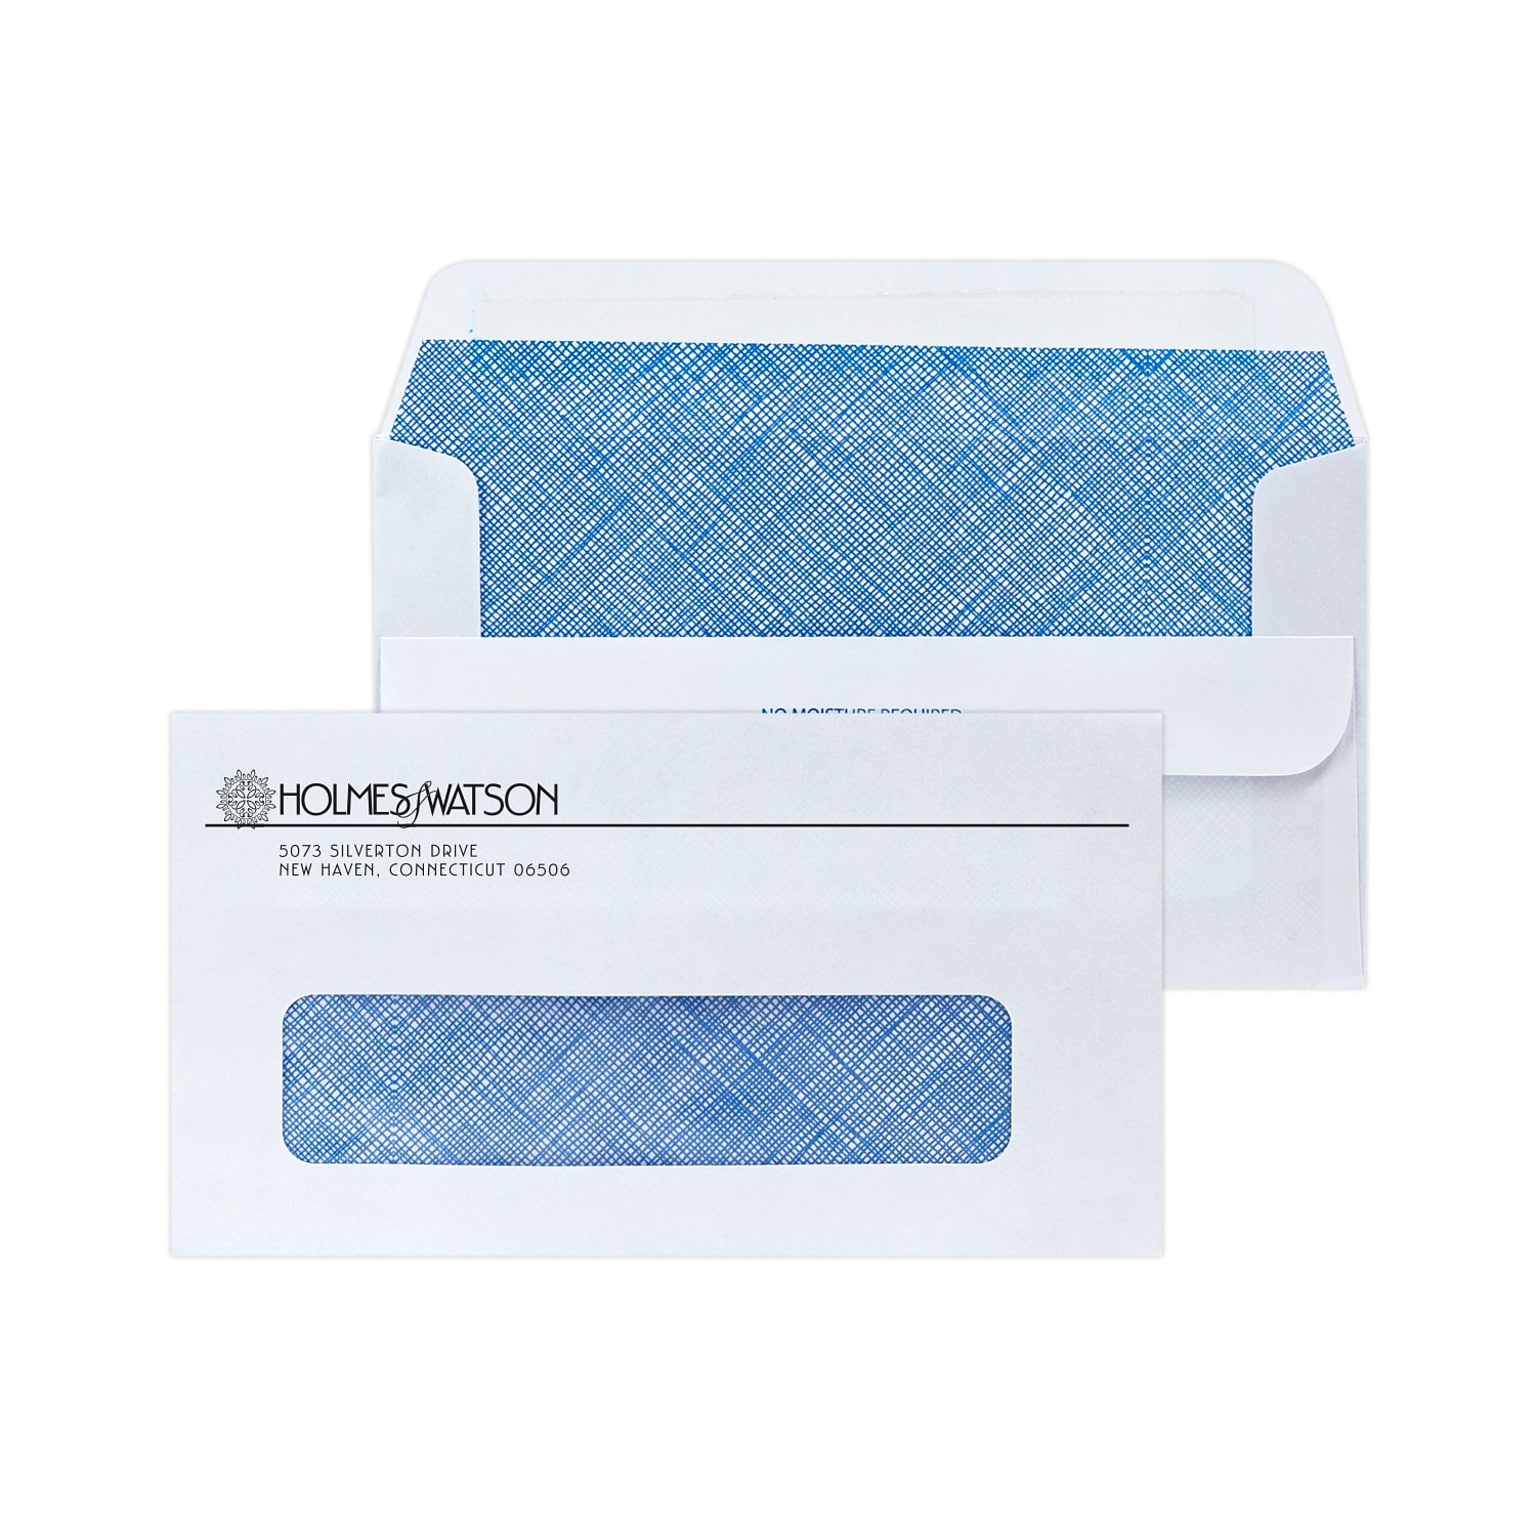 Custom #6-3/4 Self Seal Window Envelopes with Security Tint, 3 5/8 x 6 1/2, 24# White Wove, 1 Standard Ink, 250 / Pack